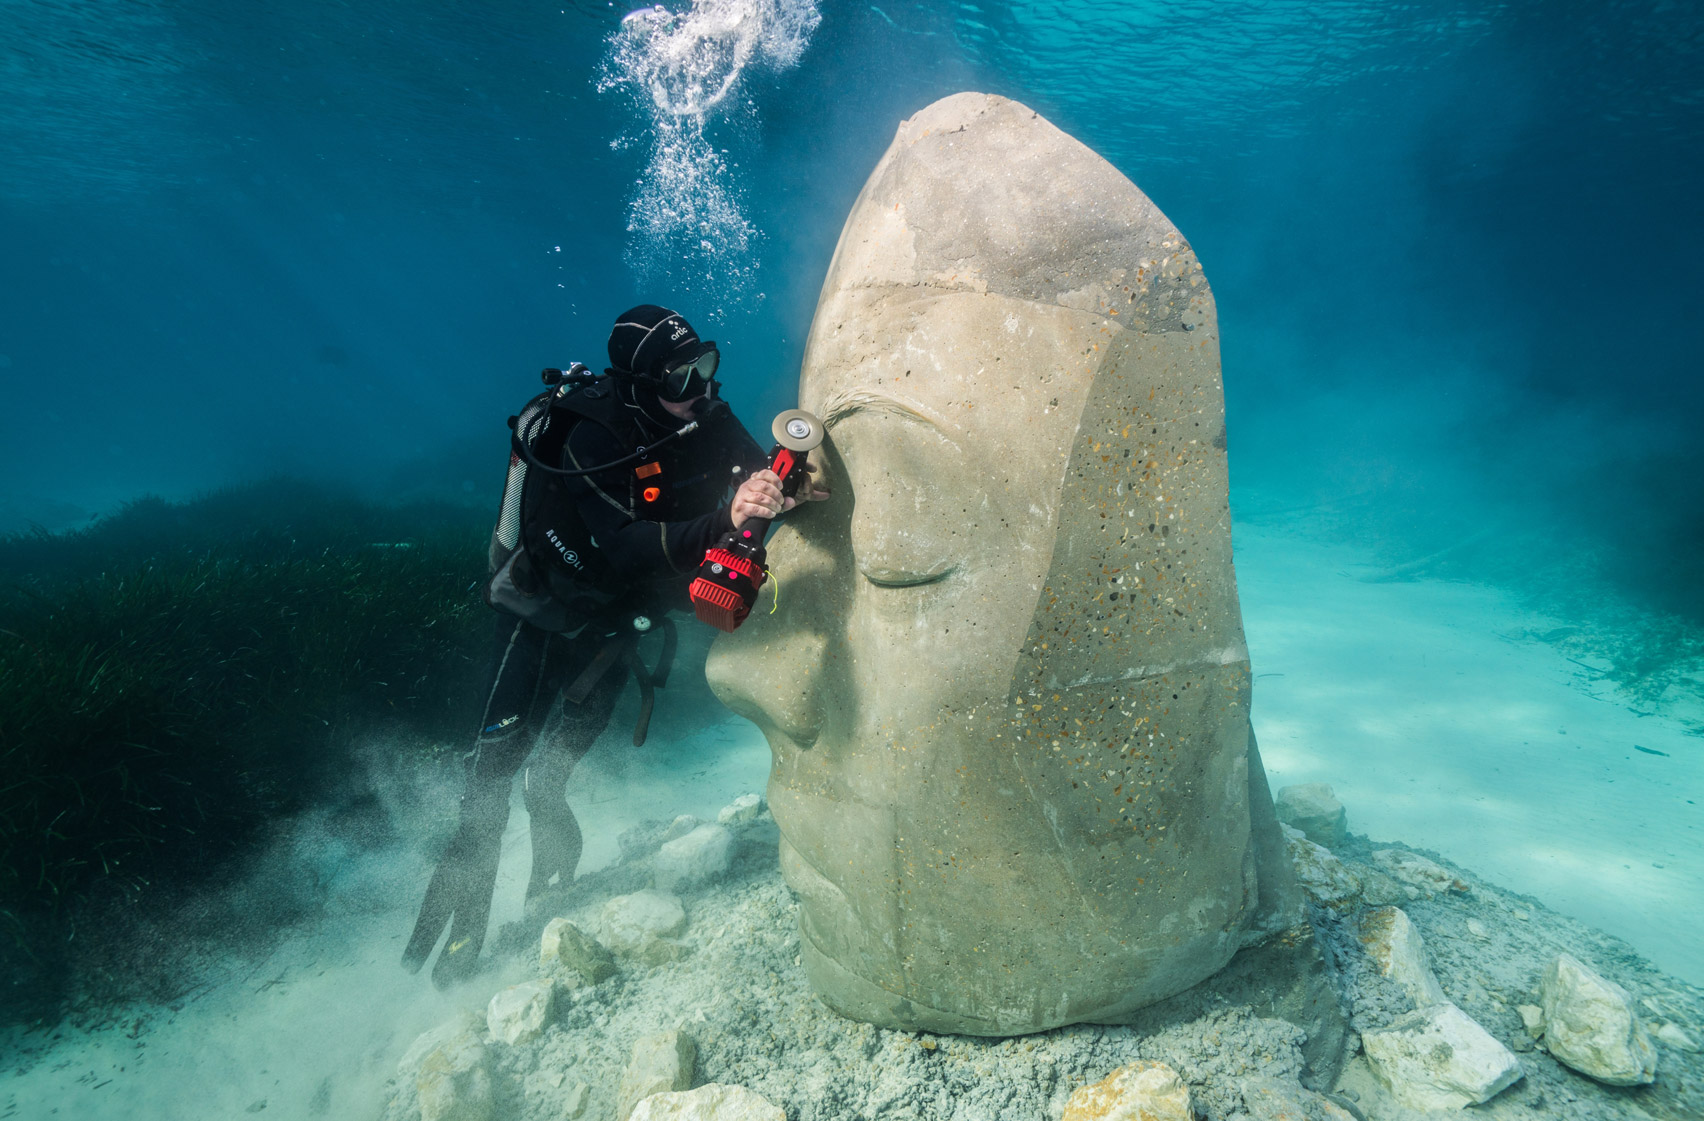 A diver carving a underwater sculpture of a human face